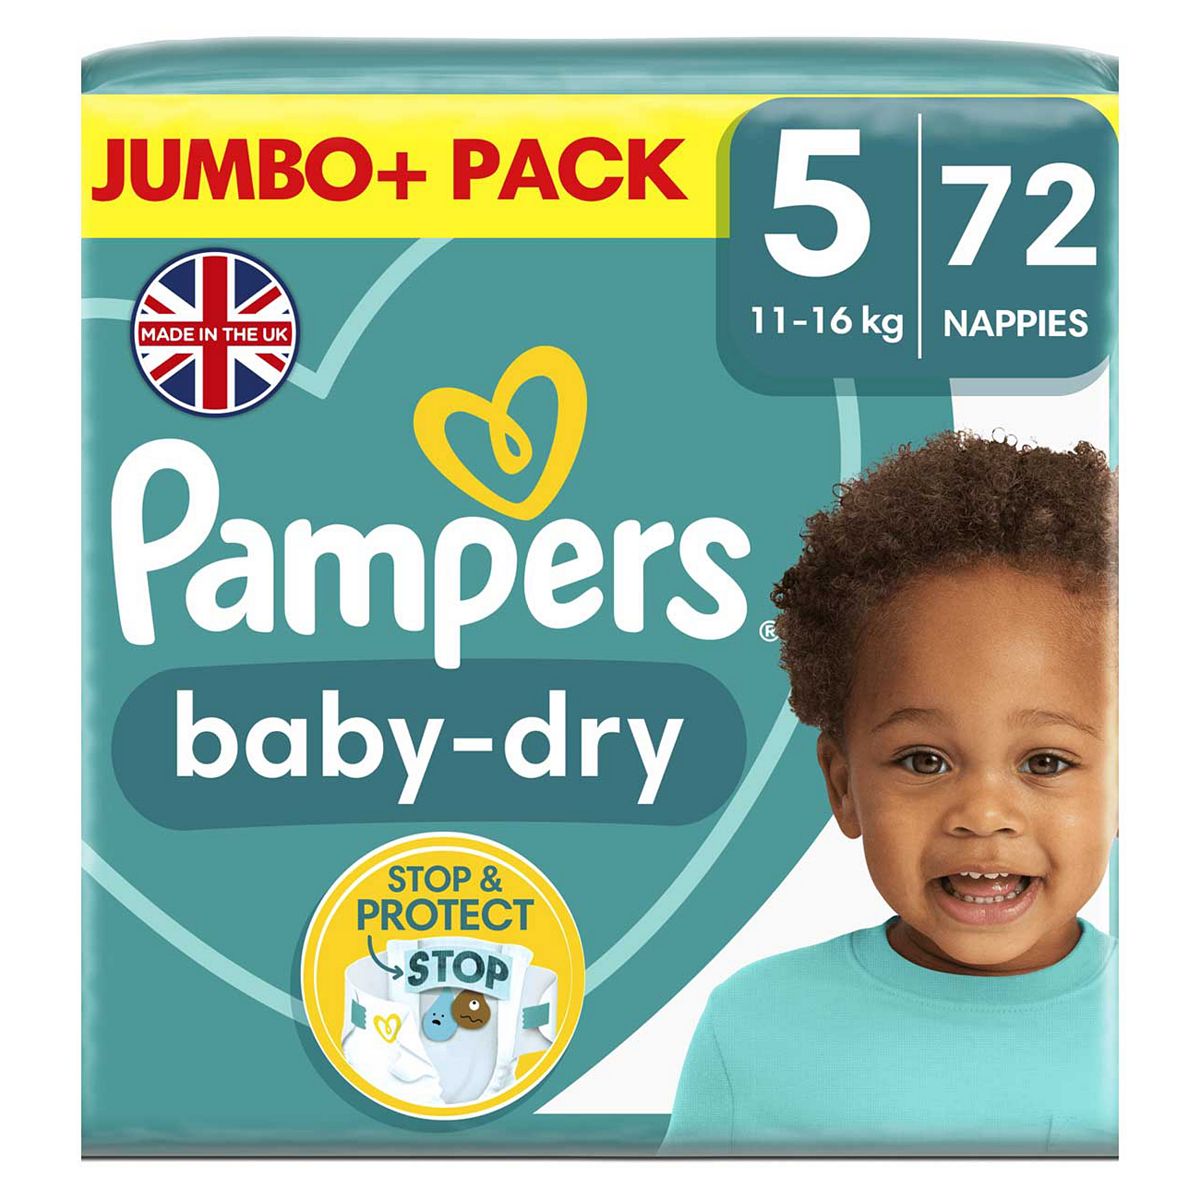 Pampers Baby-Dry Size 5, 72 Nappies, 11kg-16kg, Jumbo+ Pack GOODS Boots   